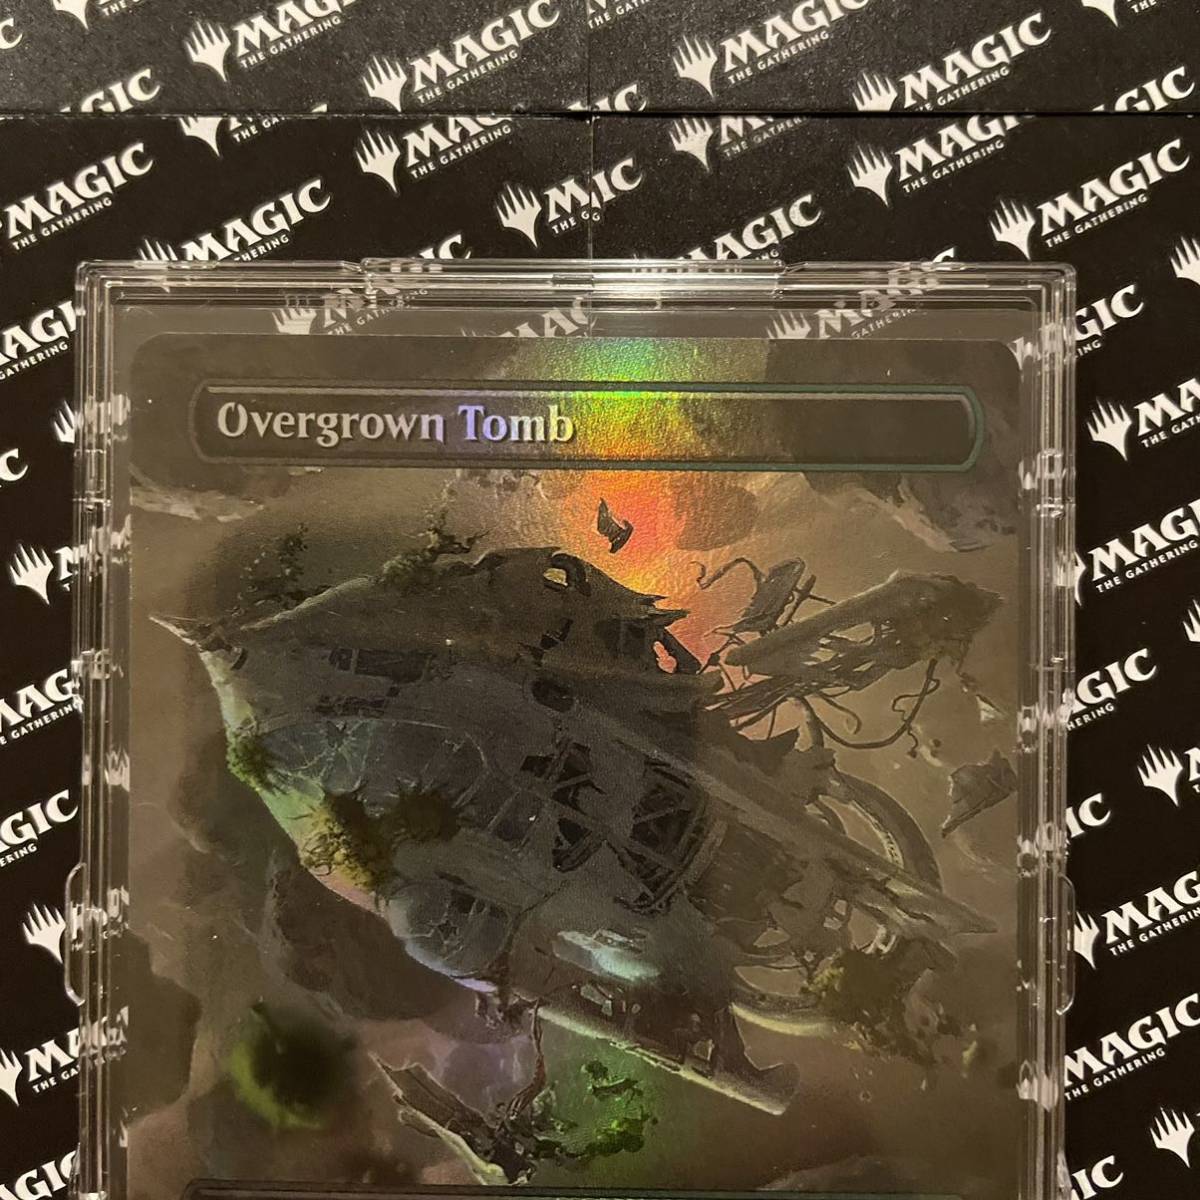 Foil ボーダーレス 草むした墓/Overgrown Tomb UNF-BF 土地R 英語/mtg 